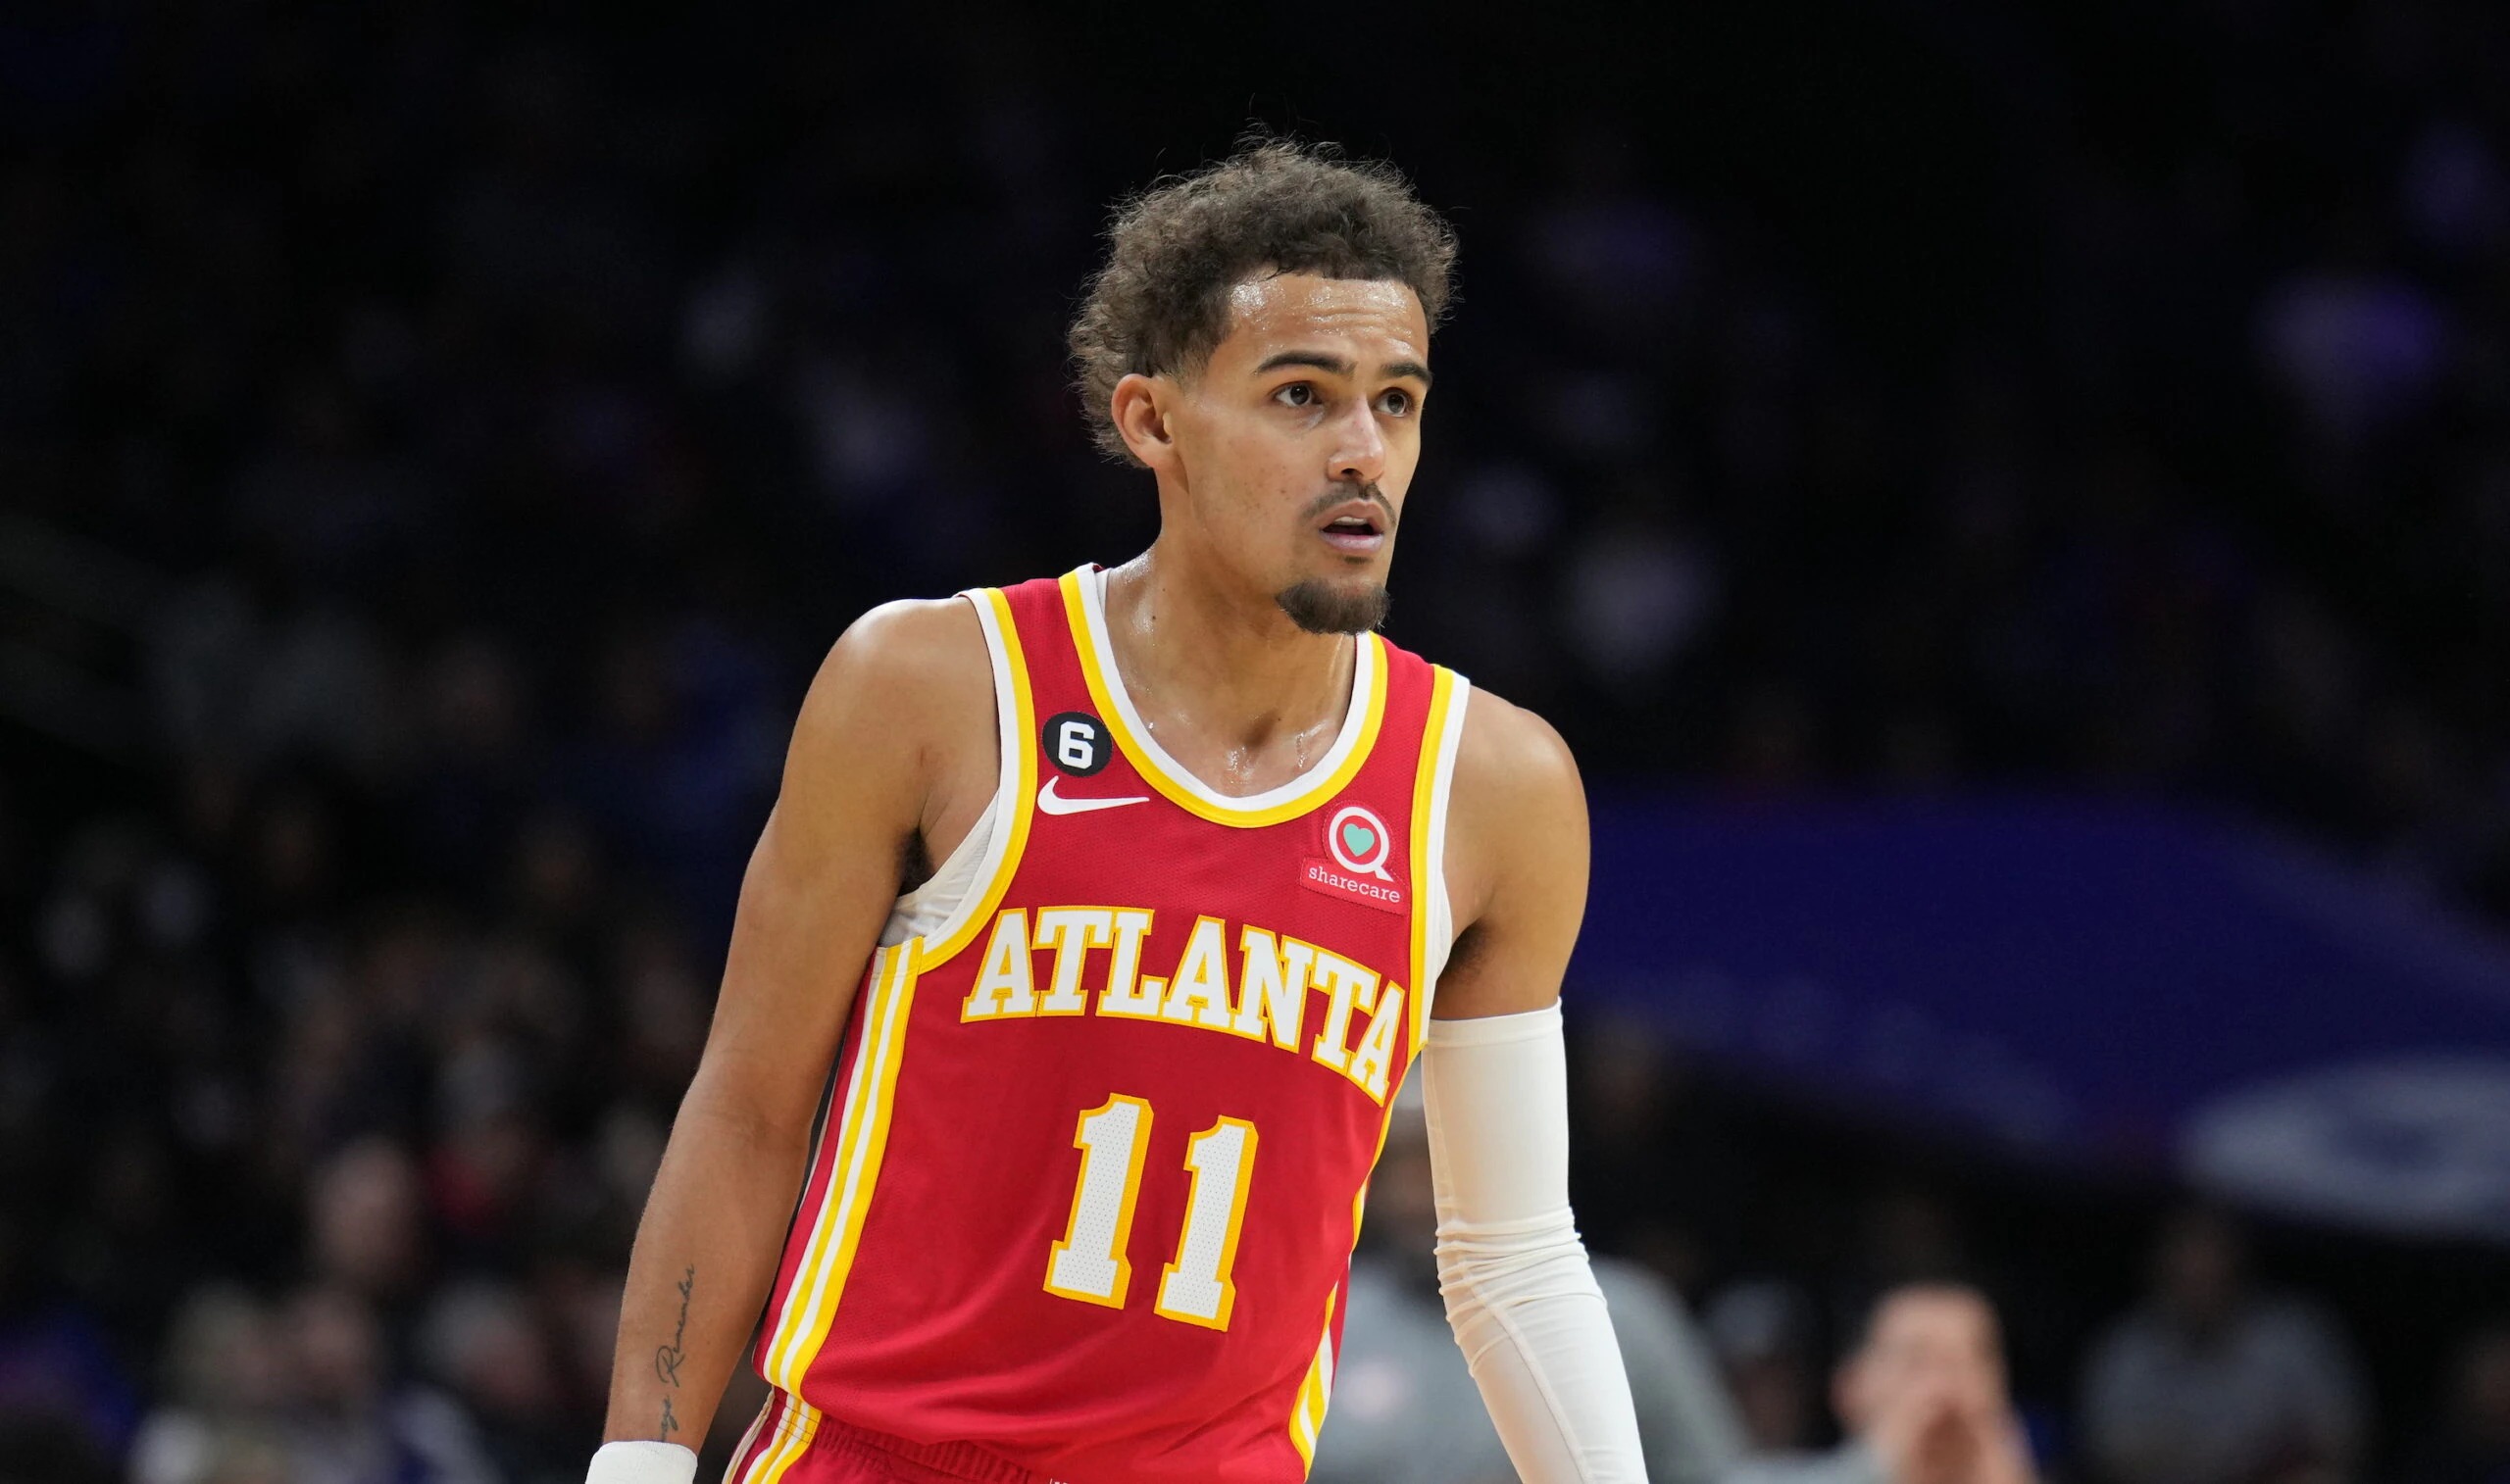 He is Bacck: Atlanta key star Trae Young is pleased to announce his arival after his long time injury